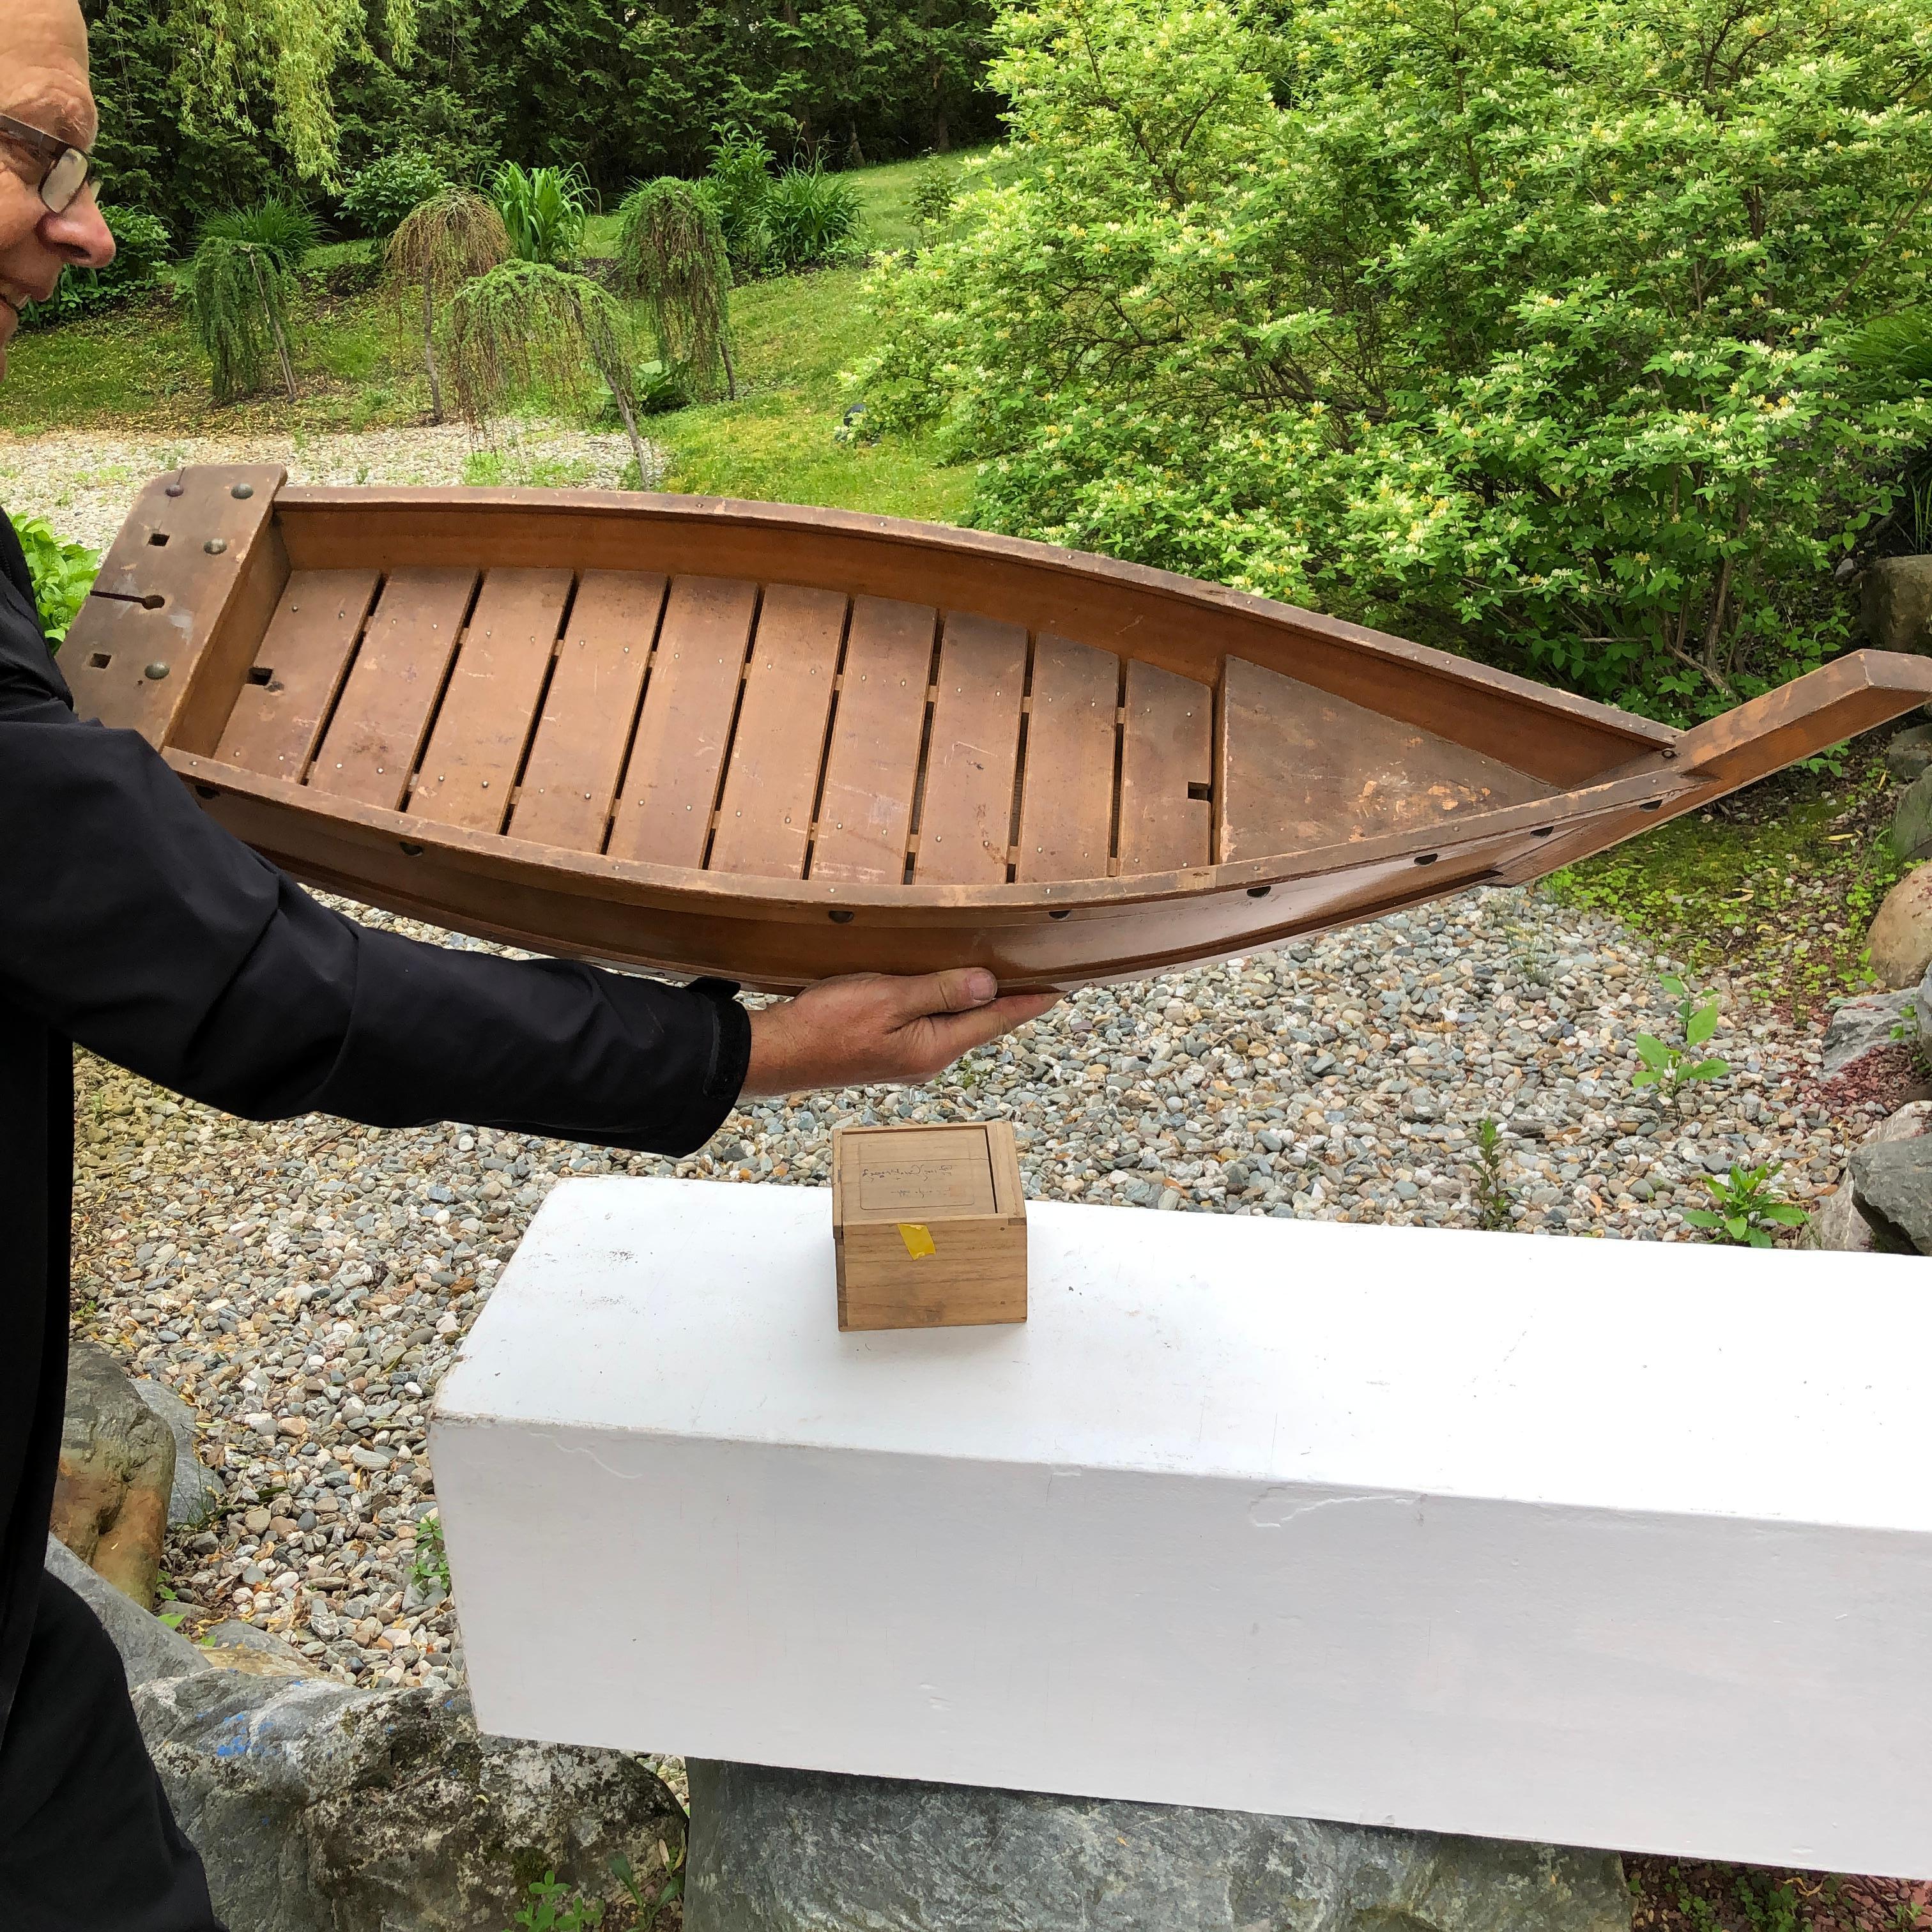 Fresh Find From our recent Japanese Acquisitions Travels

This big old hand carved wooden boat -fune- including a hand fitted wooden slat interior and brass riveted exterior was likely once used decades ago as a flower arranging display vessel -